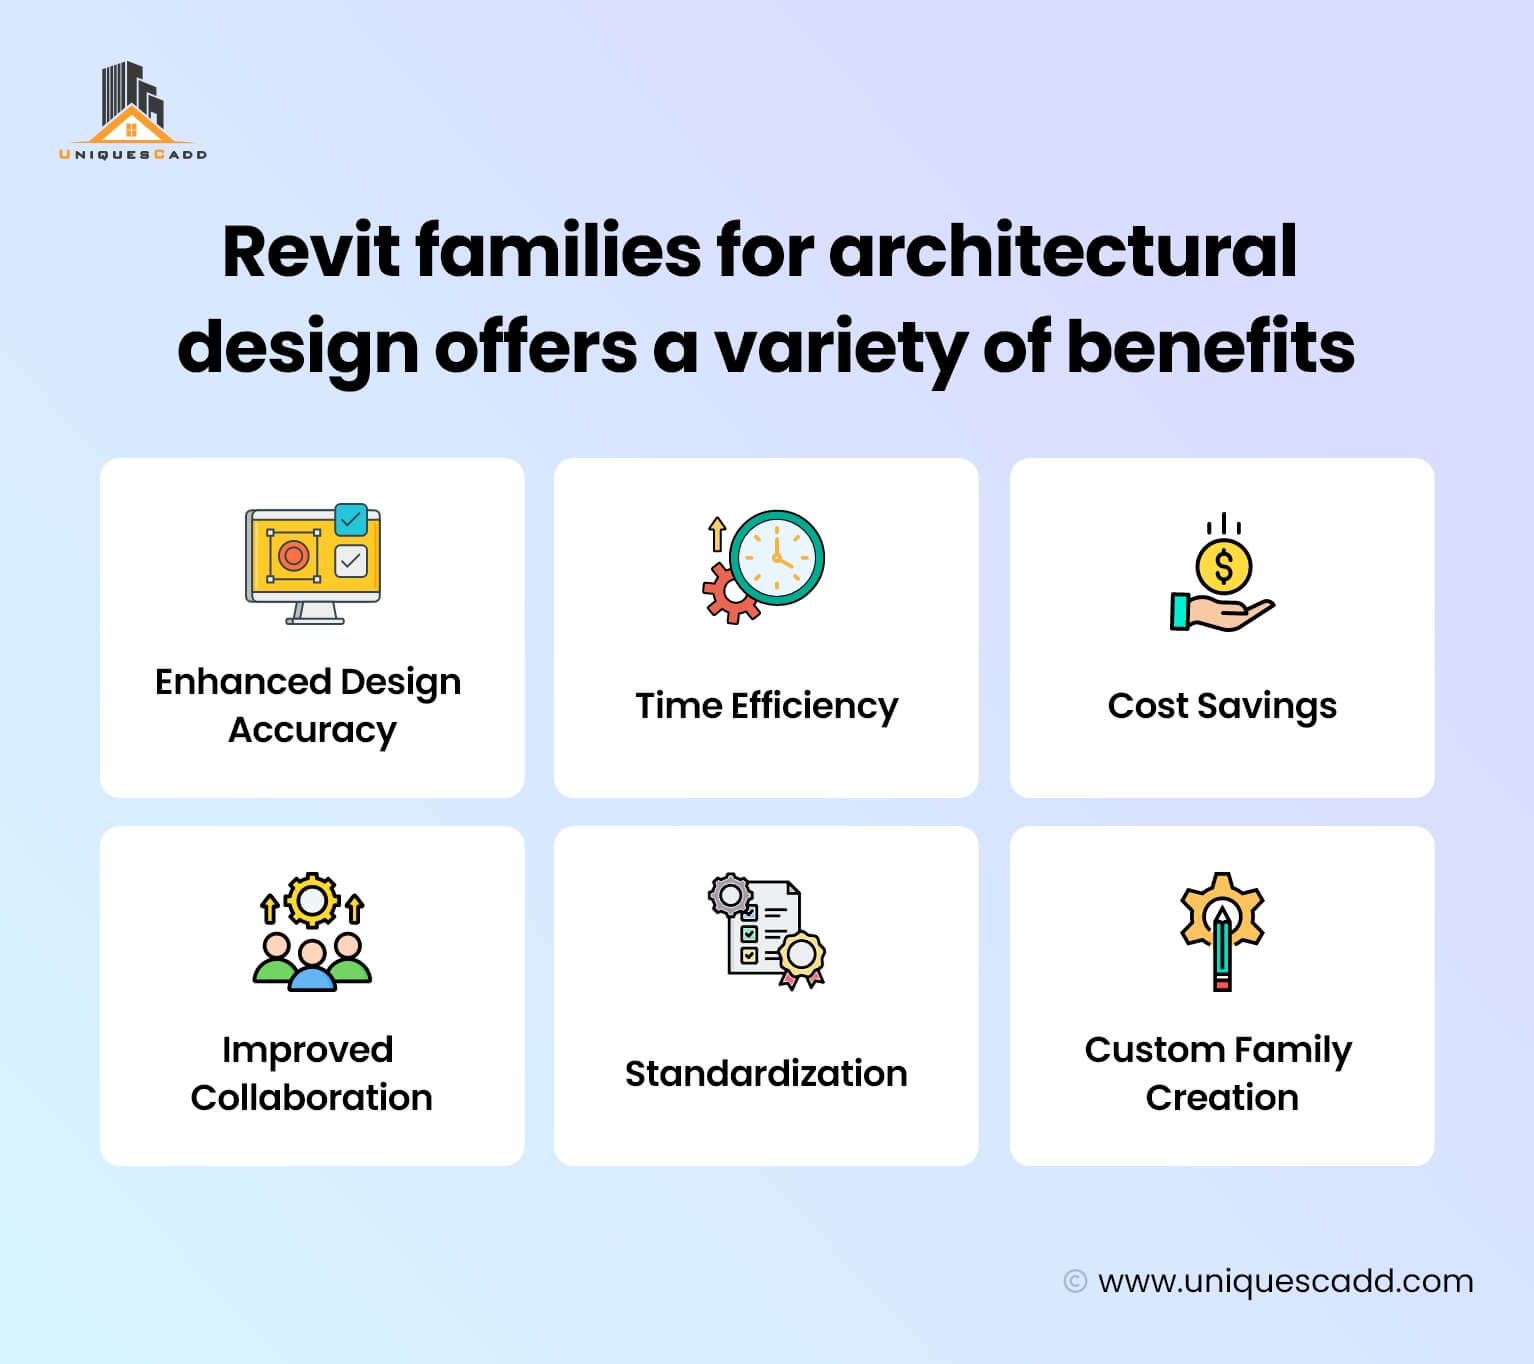 Revit families for architectural design offers a variety of benefits